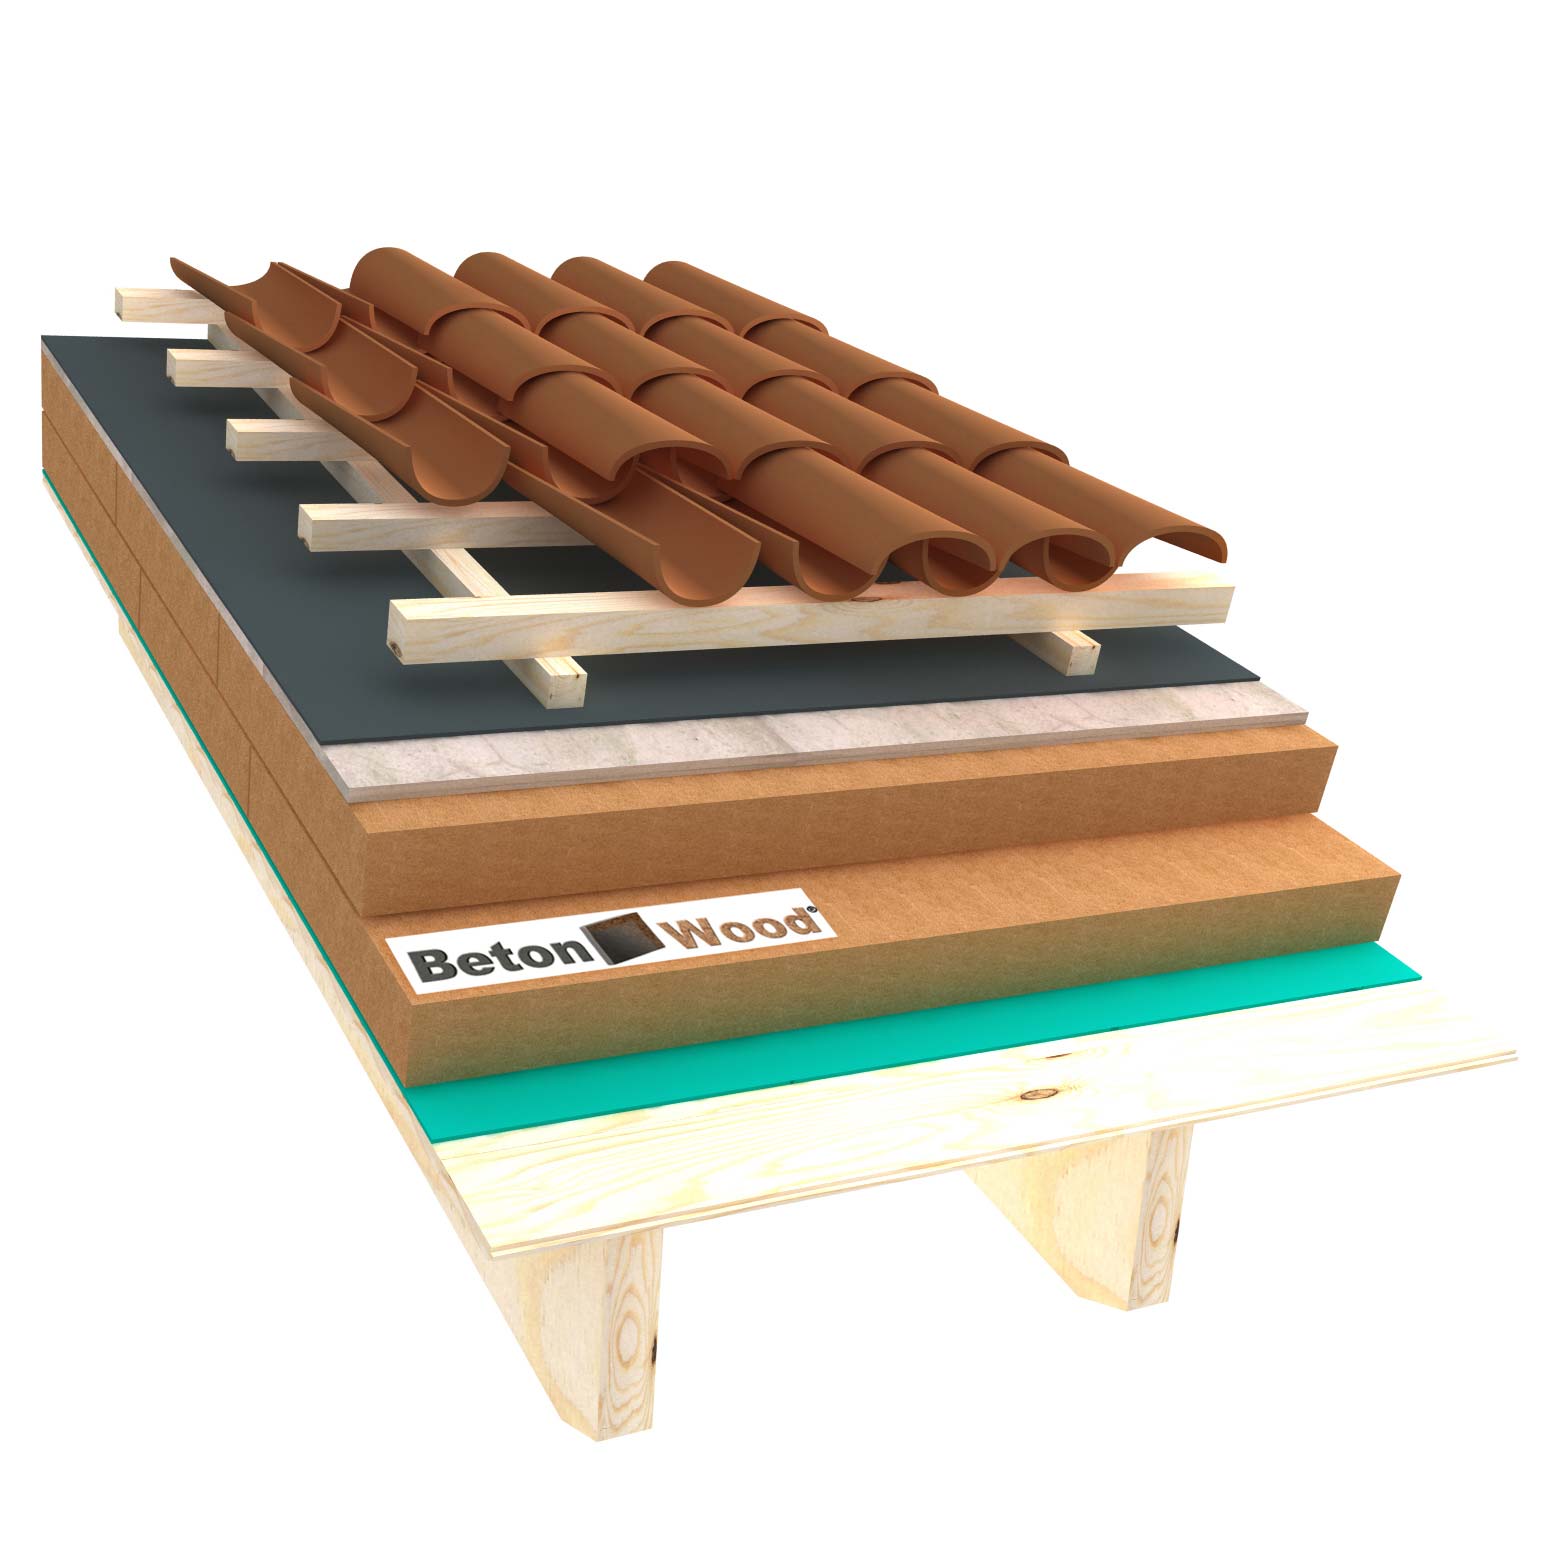 Ventilated roof with wood fiber Special and cement bonded particle boards on matchboarding